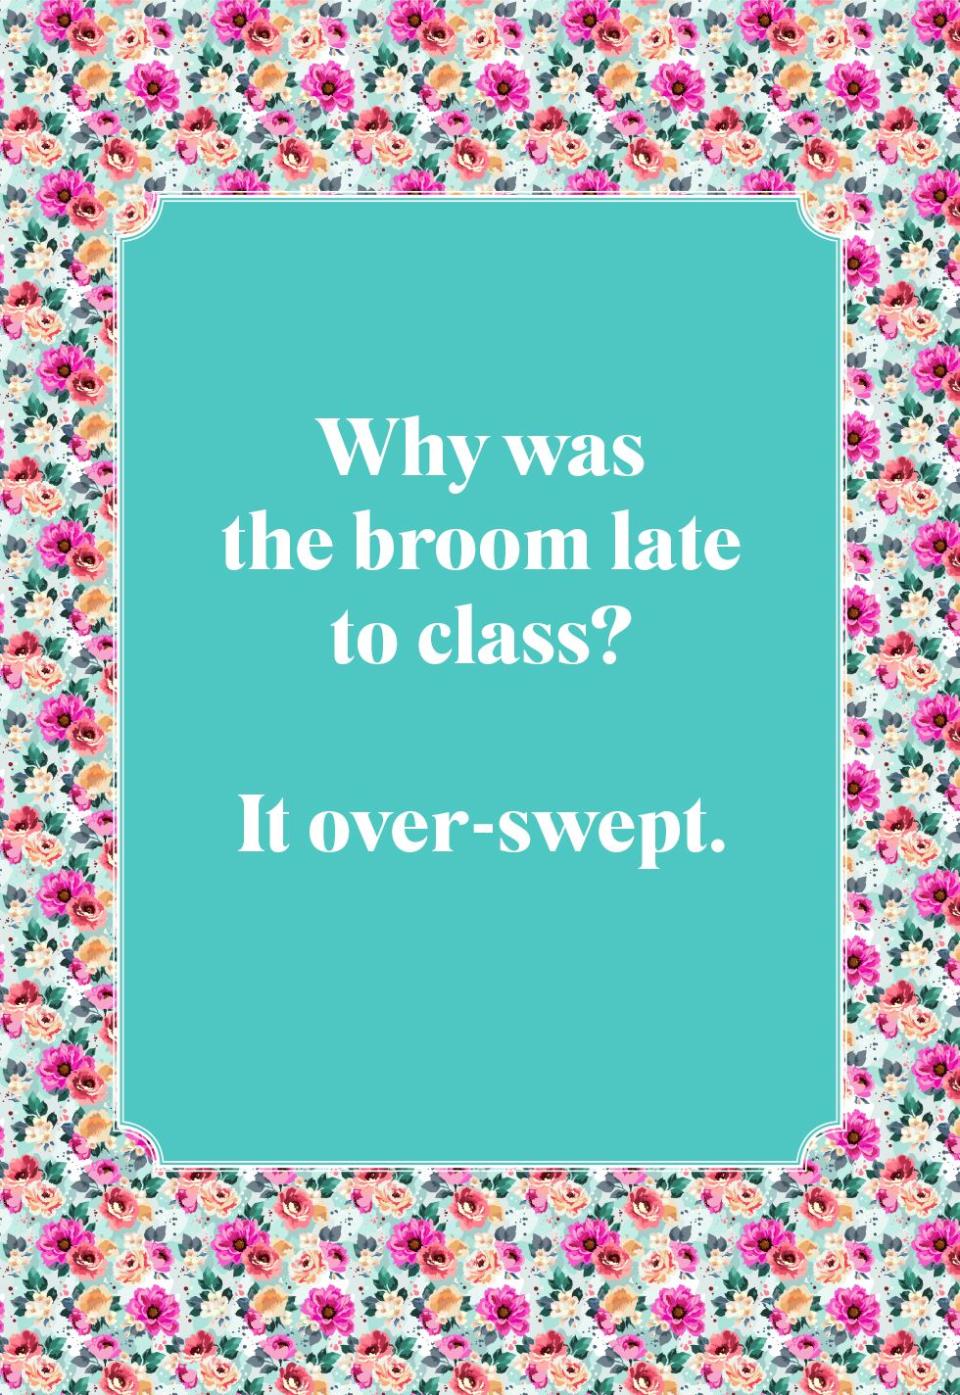 Why was the broom late to class?